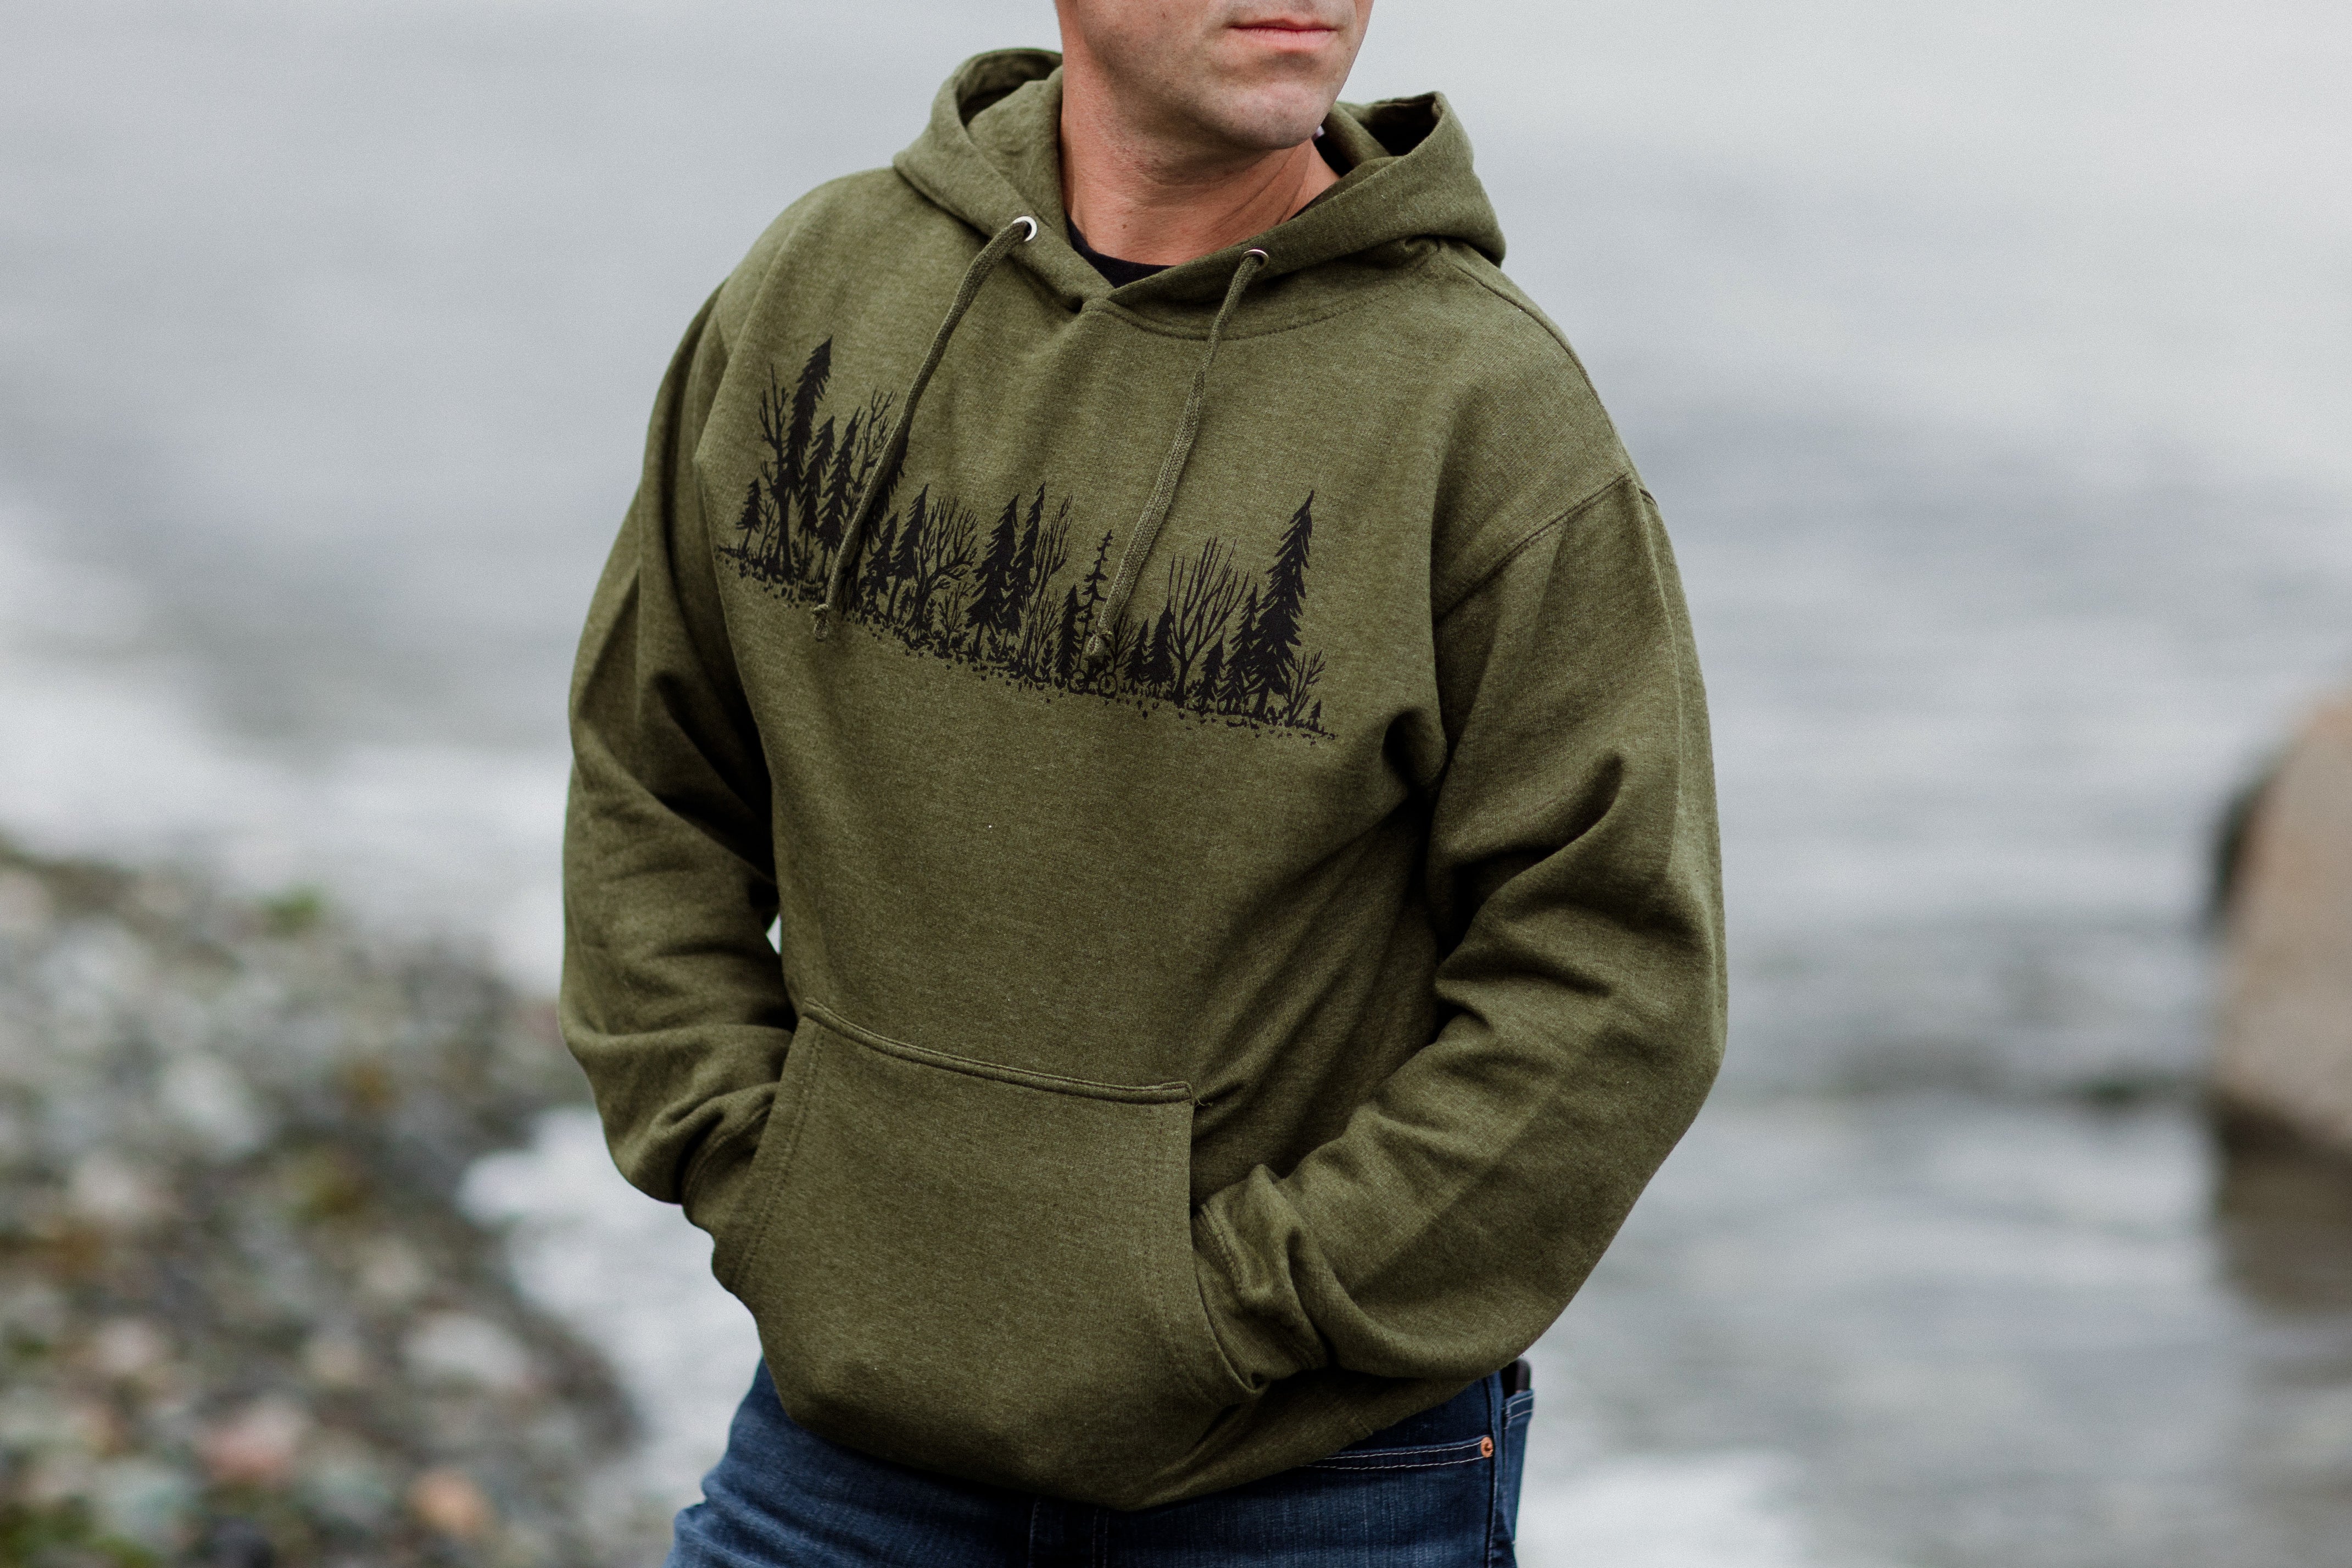 Bough & Antler Forest Ride Hoodie